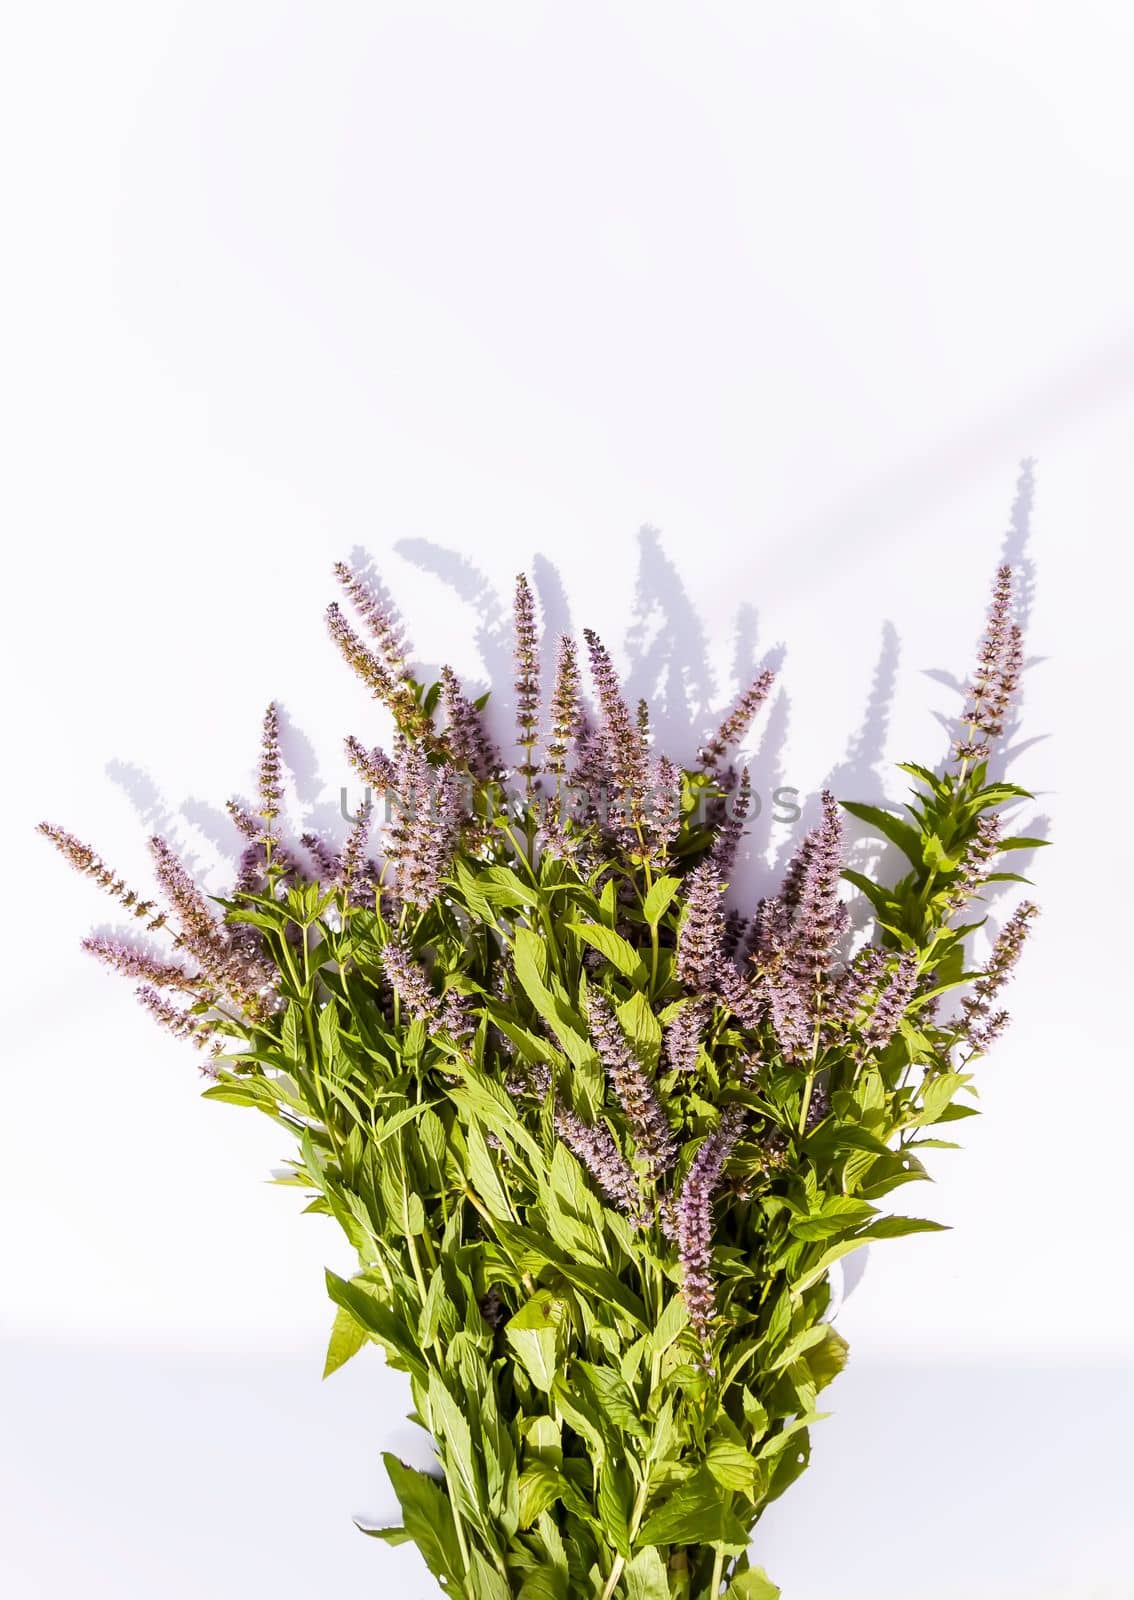 Fresh mint flowers for cosmetic products or herbal tea. Medical plants.